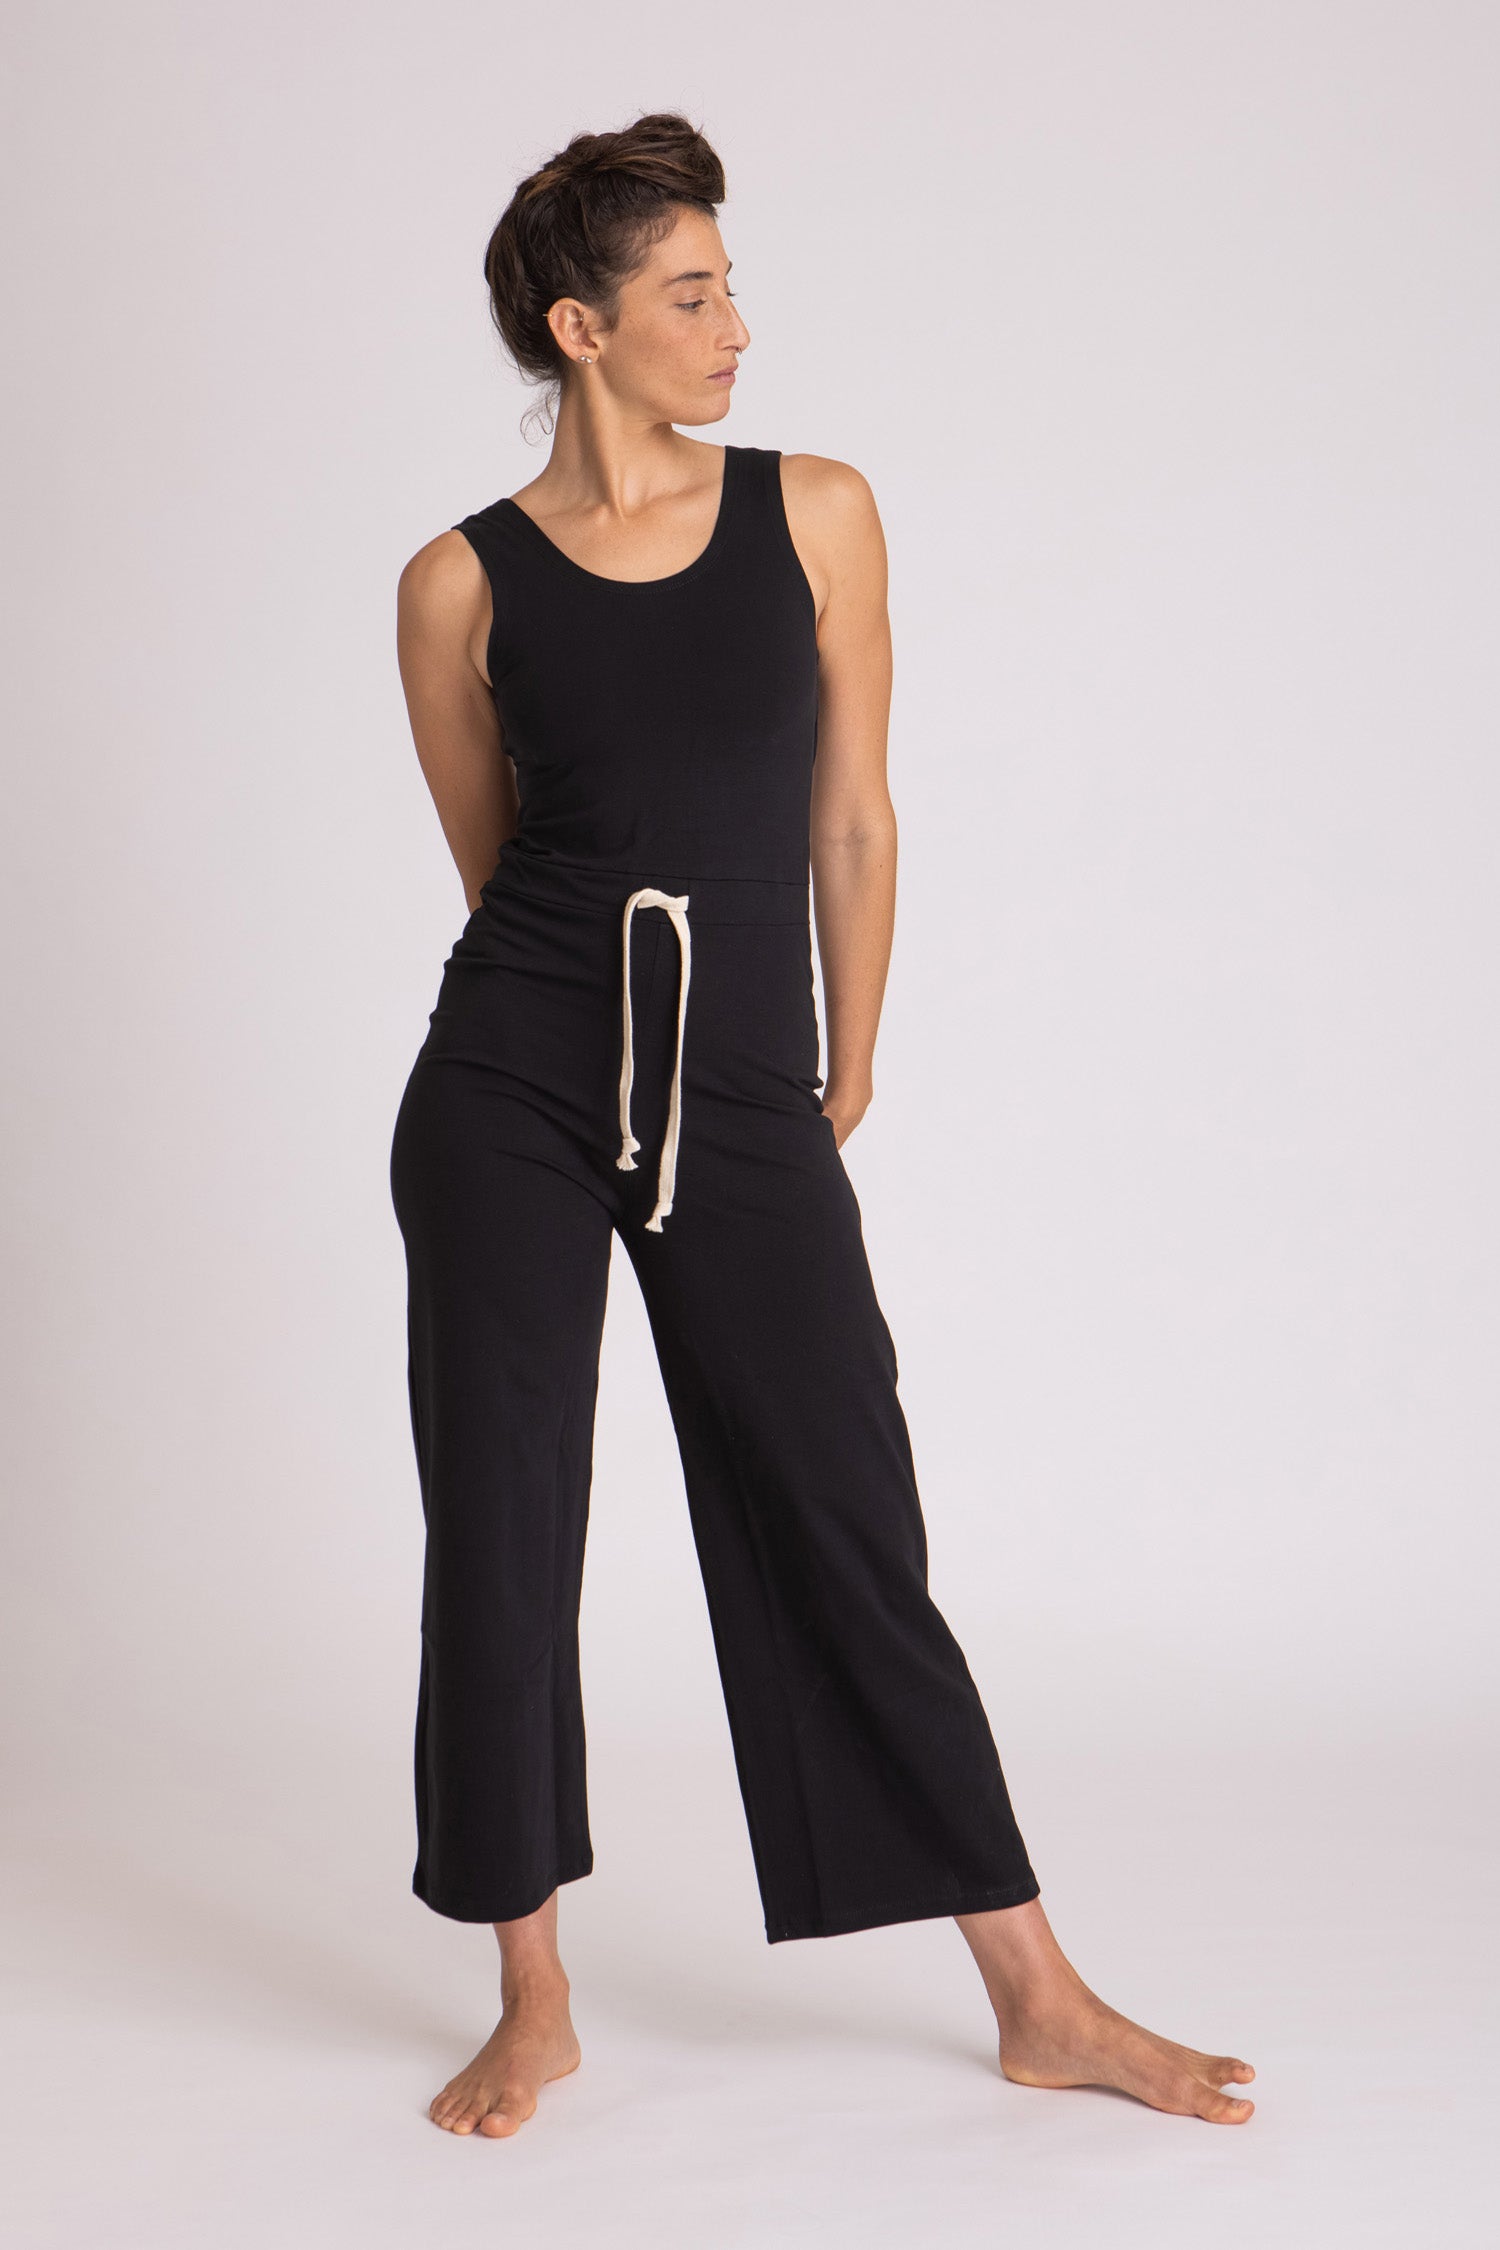 Rust Yoga Jumpsuit with Pockets